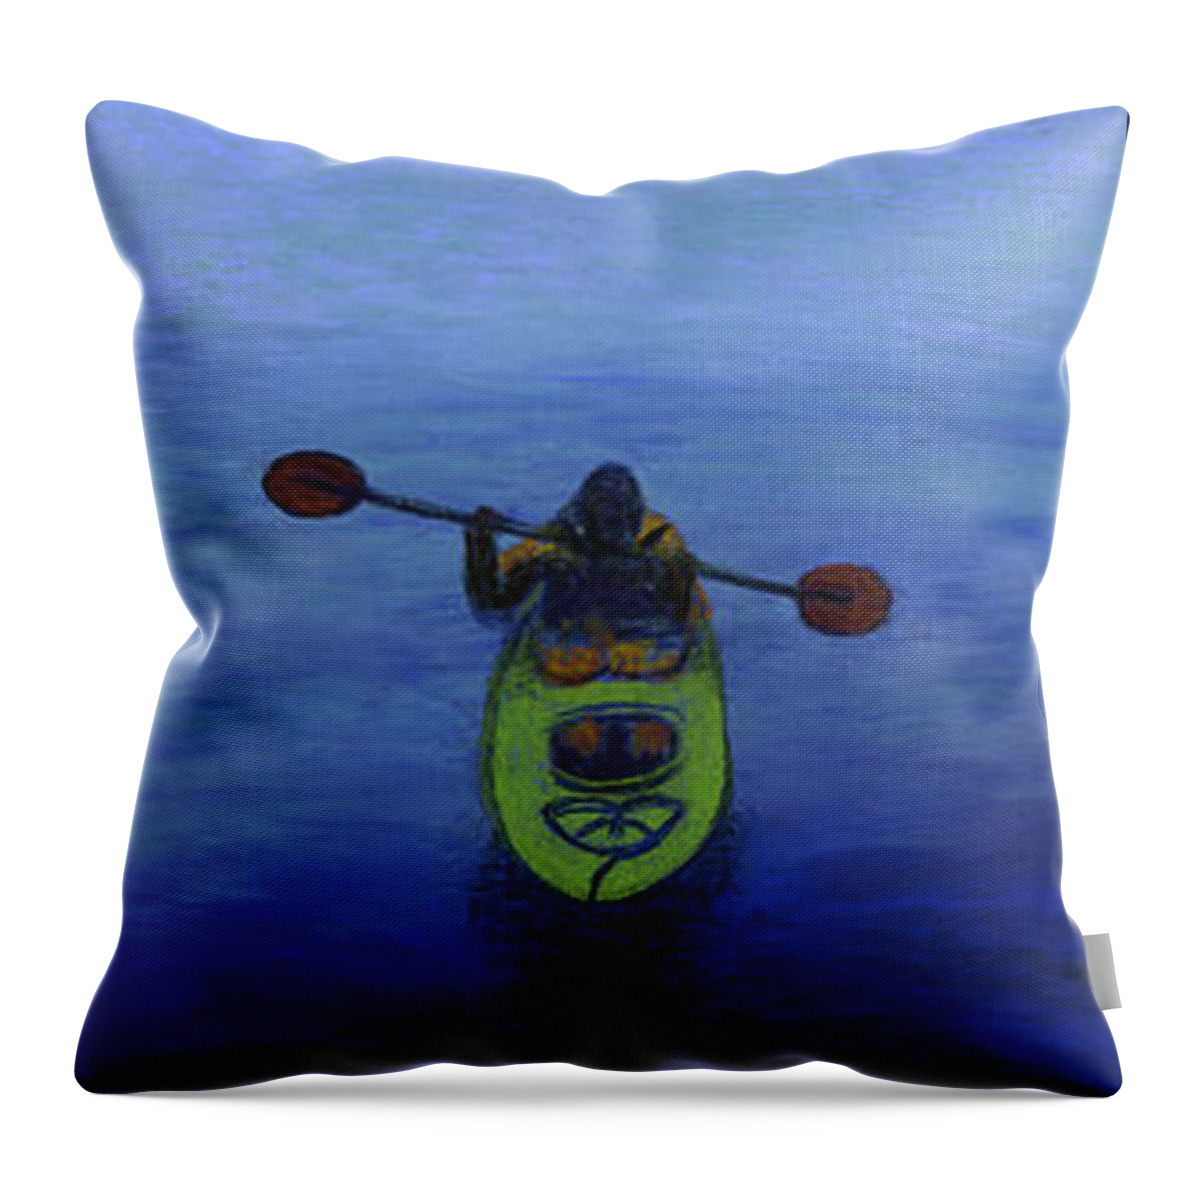 Kayak Throw Pillow featuring the painting The Kayaker by Ginny Neece